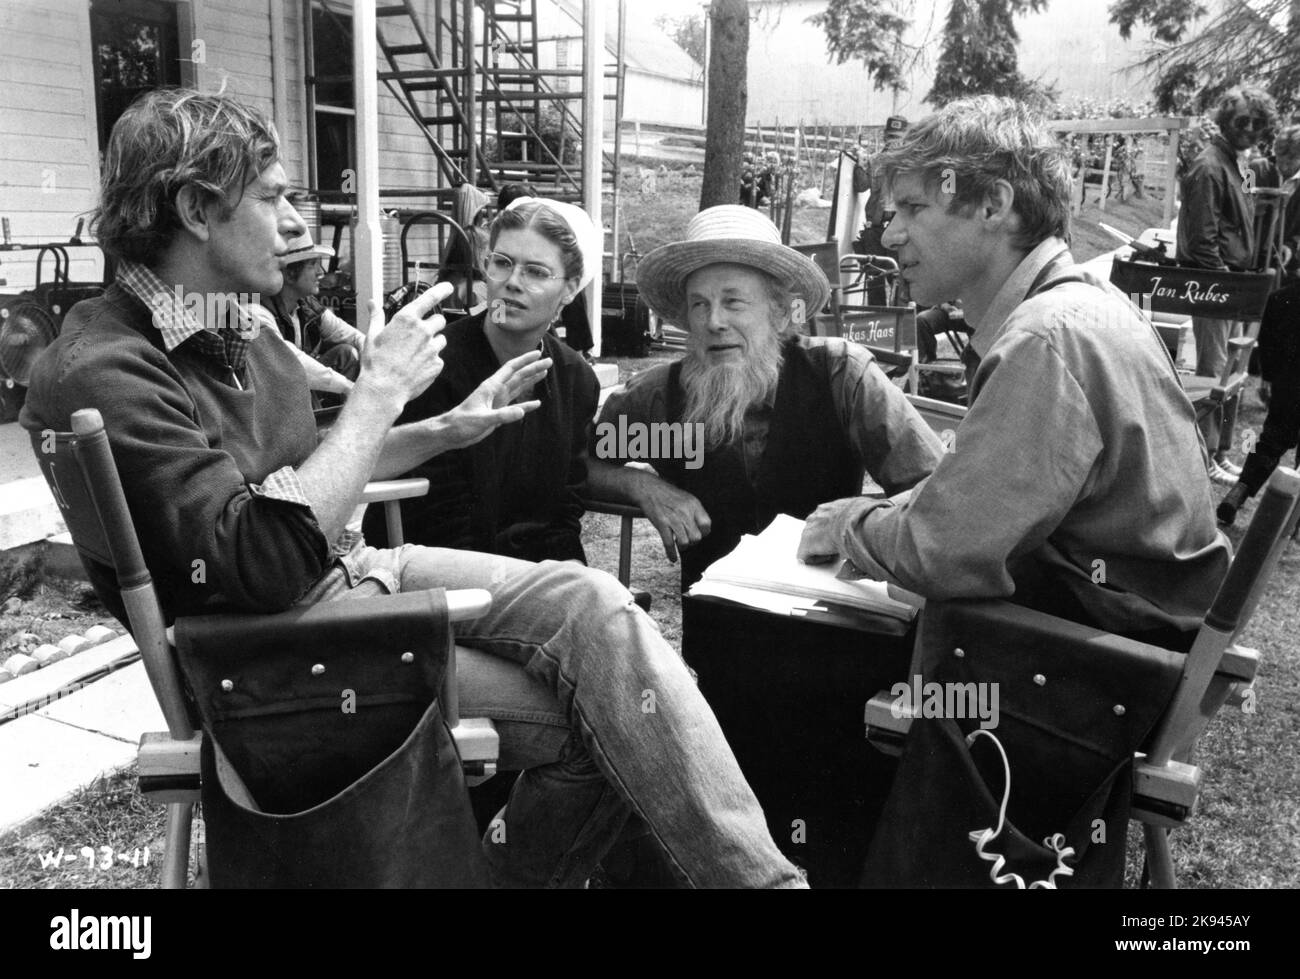 Director PETER WEIR KELLY McGILLIS JAN RUBES and HARRISON FORD on set location candid in Pennsylvania during filming of WITNESS 1985 director PETER WEIR music Maurice Jarre An Edward S. Feldman Production / Paramount Pictures Stock Photo